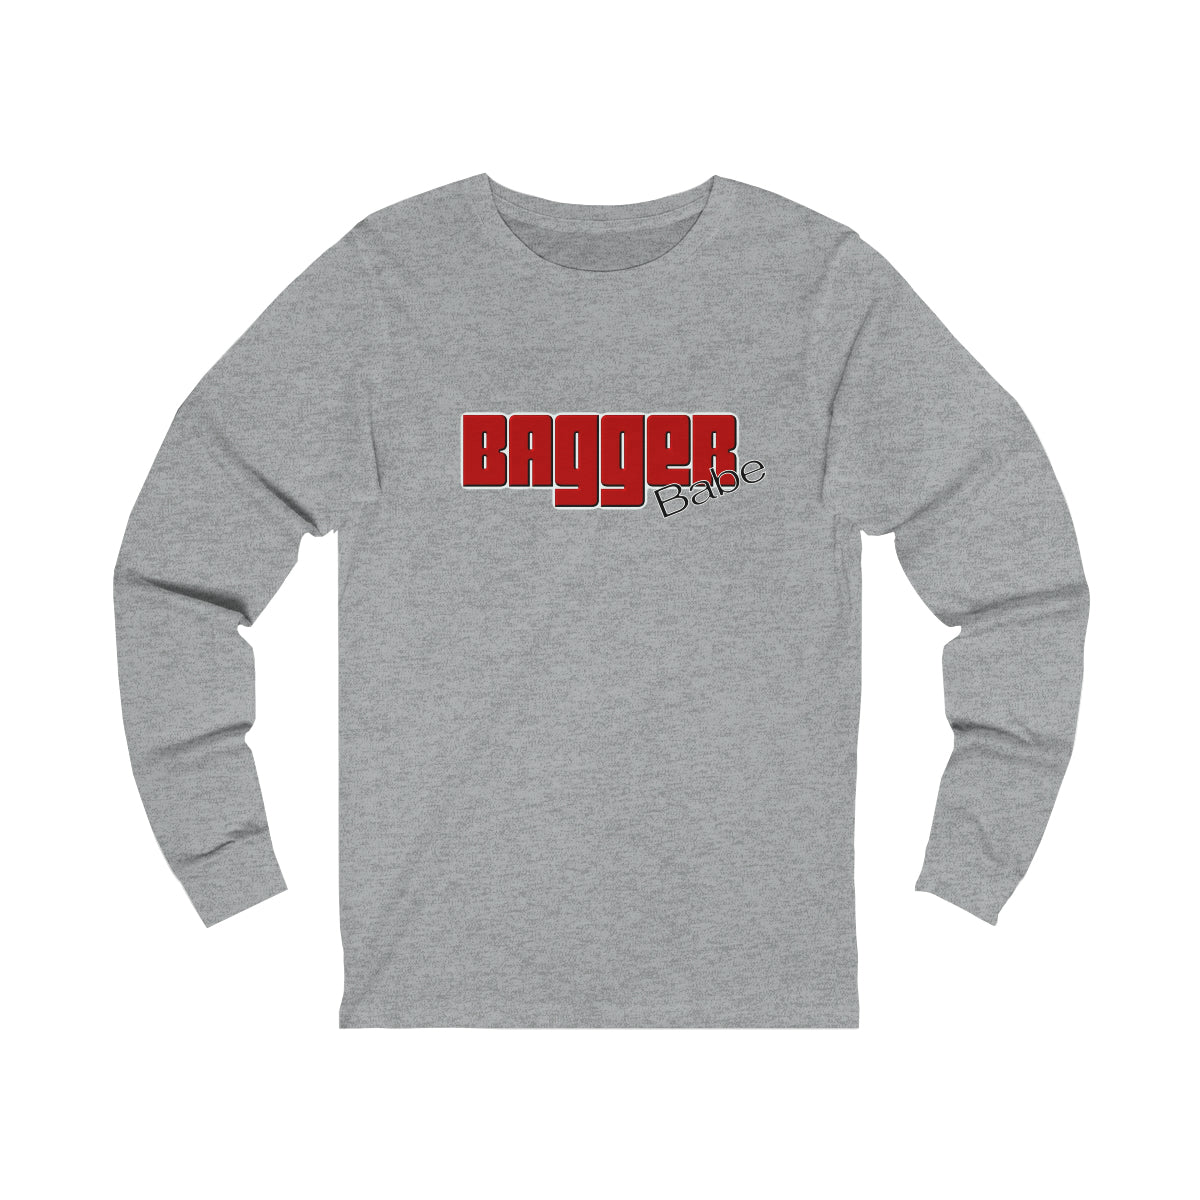 Bagger Babe (Red Letters) Unisex Jersey Long Sleeve Tee